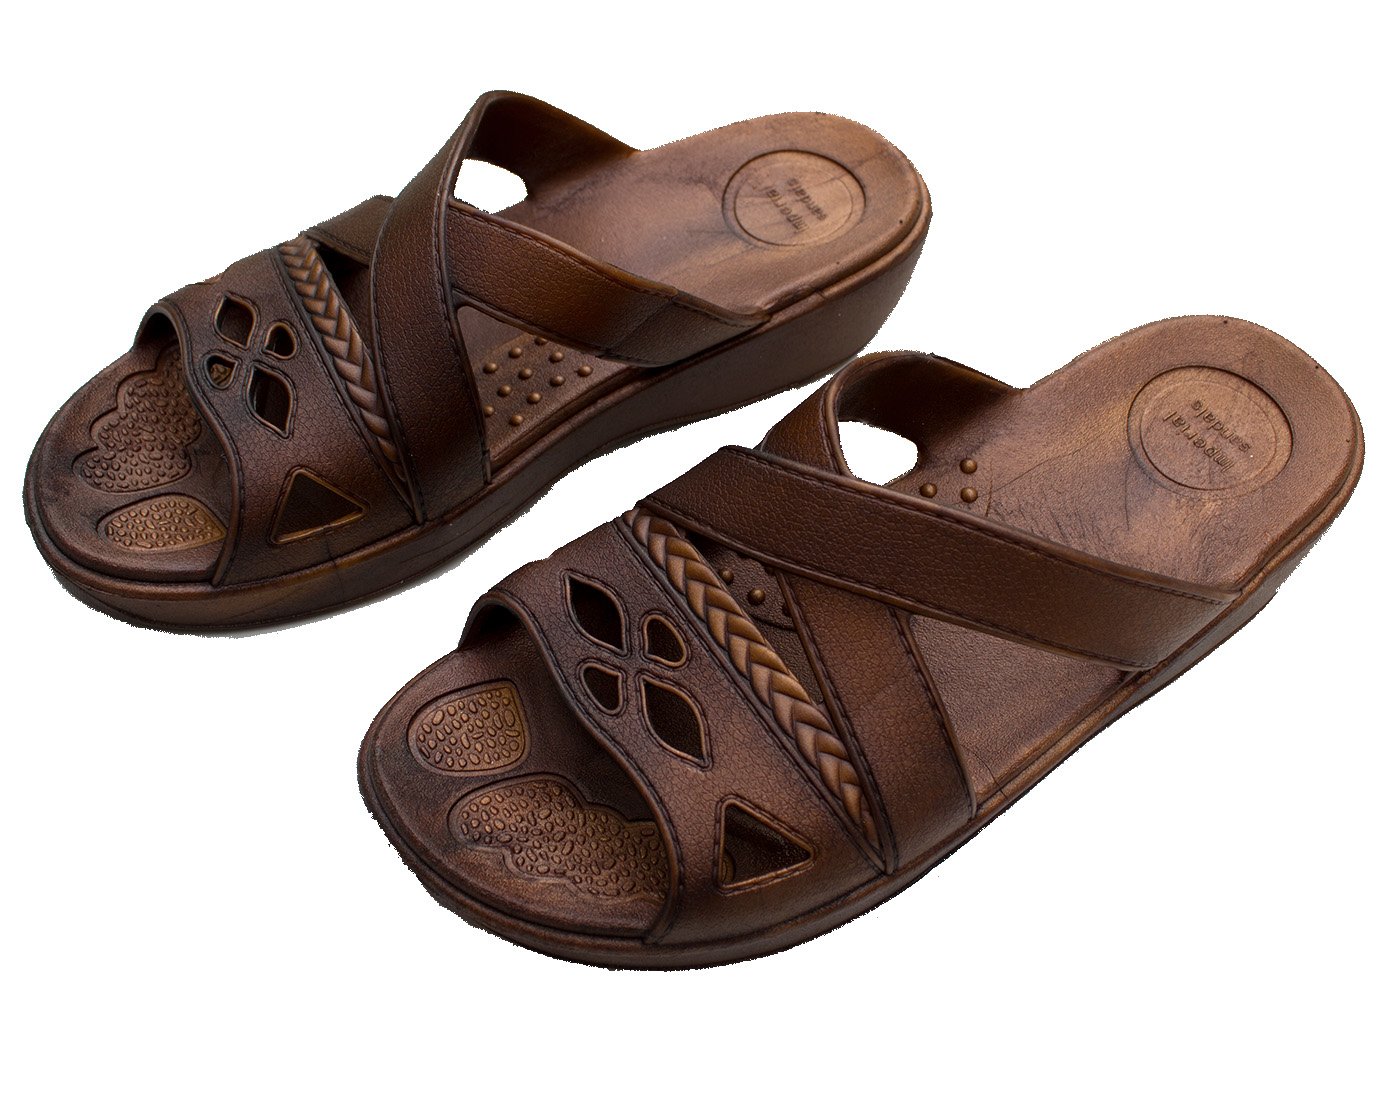 Womens Comfortable Imperial Sandals Hawaii Brown Slipper